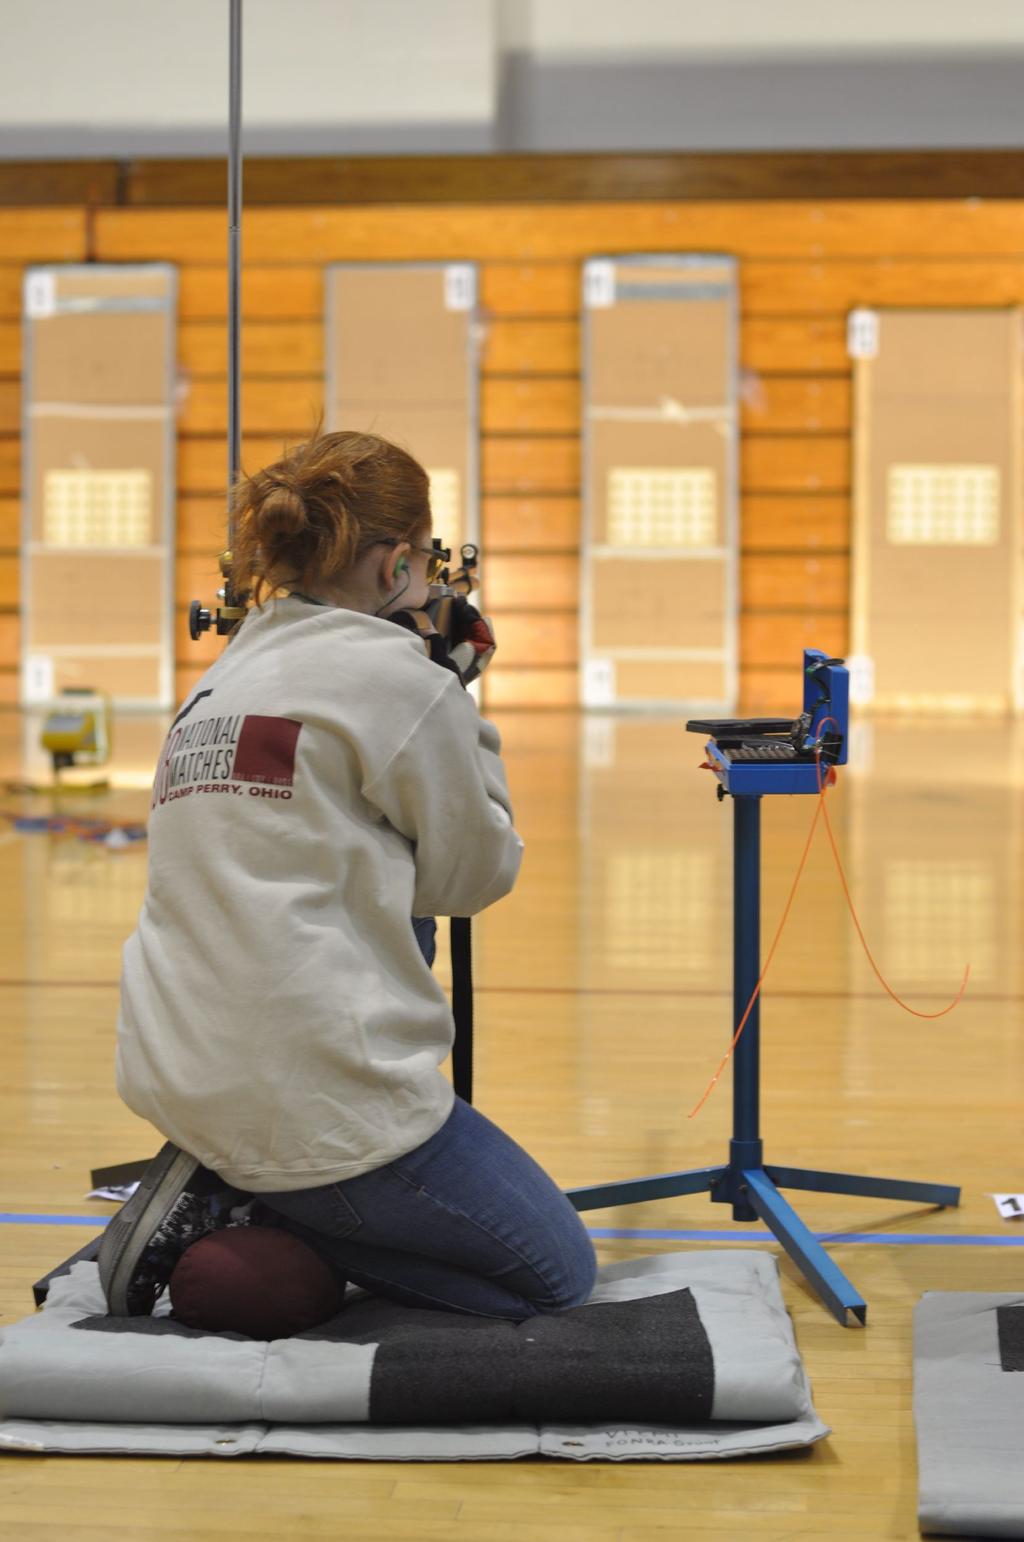 Raise the Quality of Your Competitions Quality competitions will: Provide an even playing field for all competitors. Build excitement among shooters and spectators.